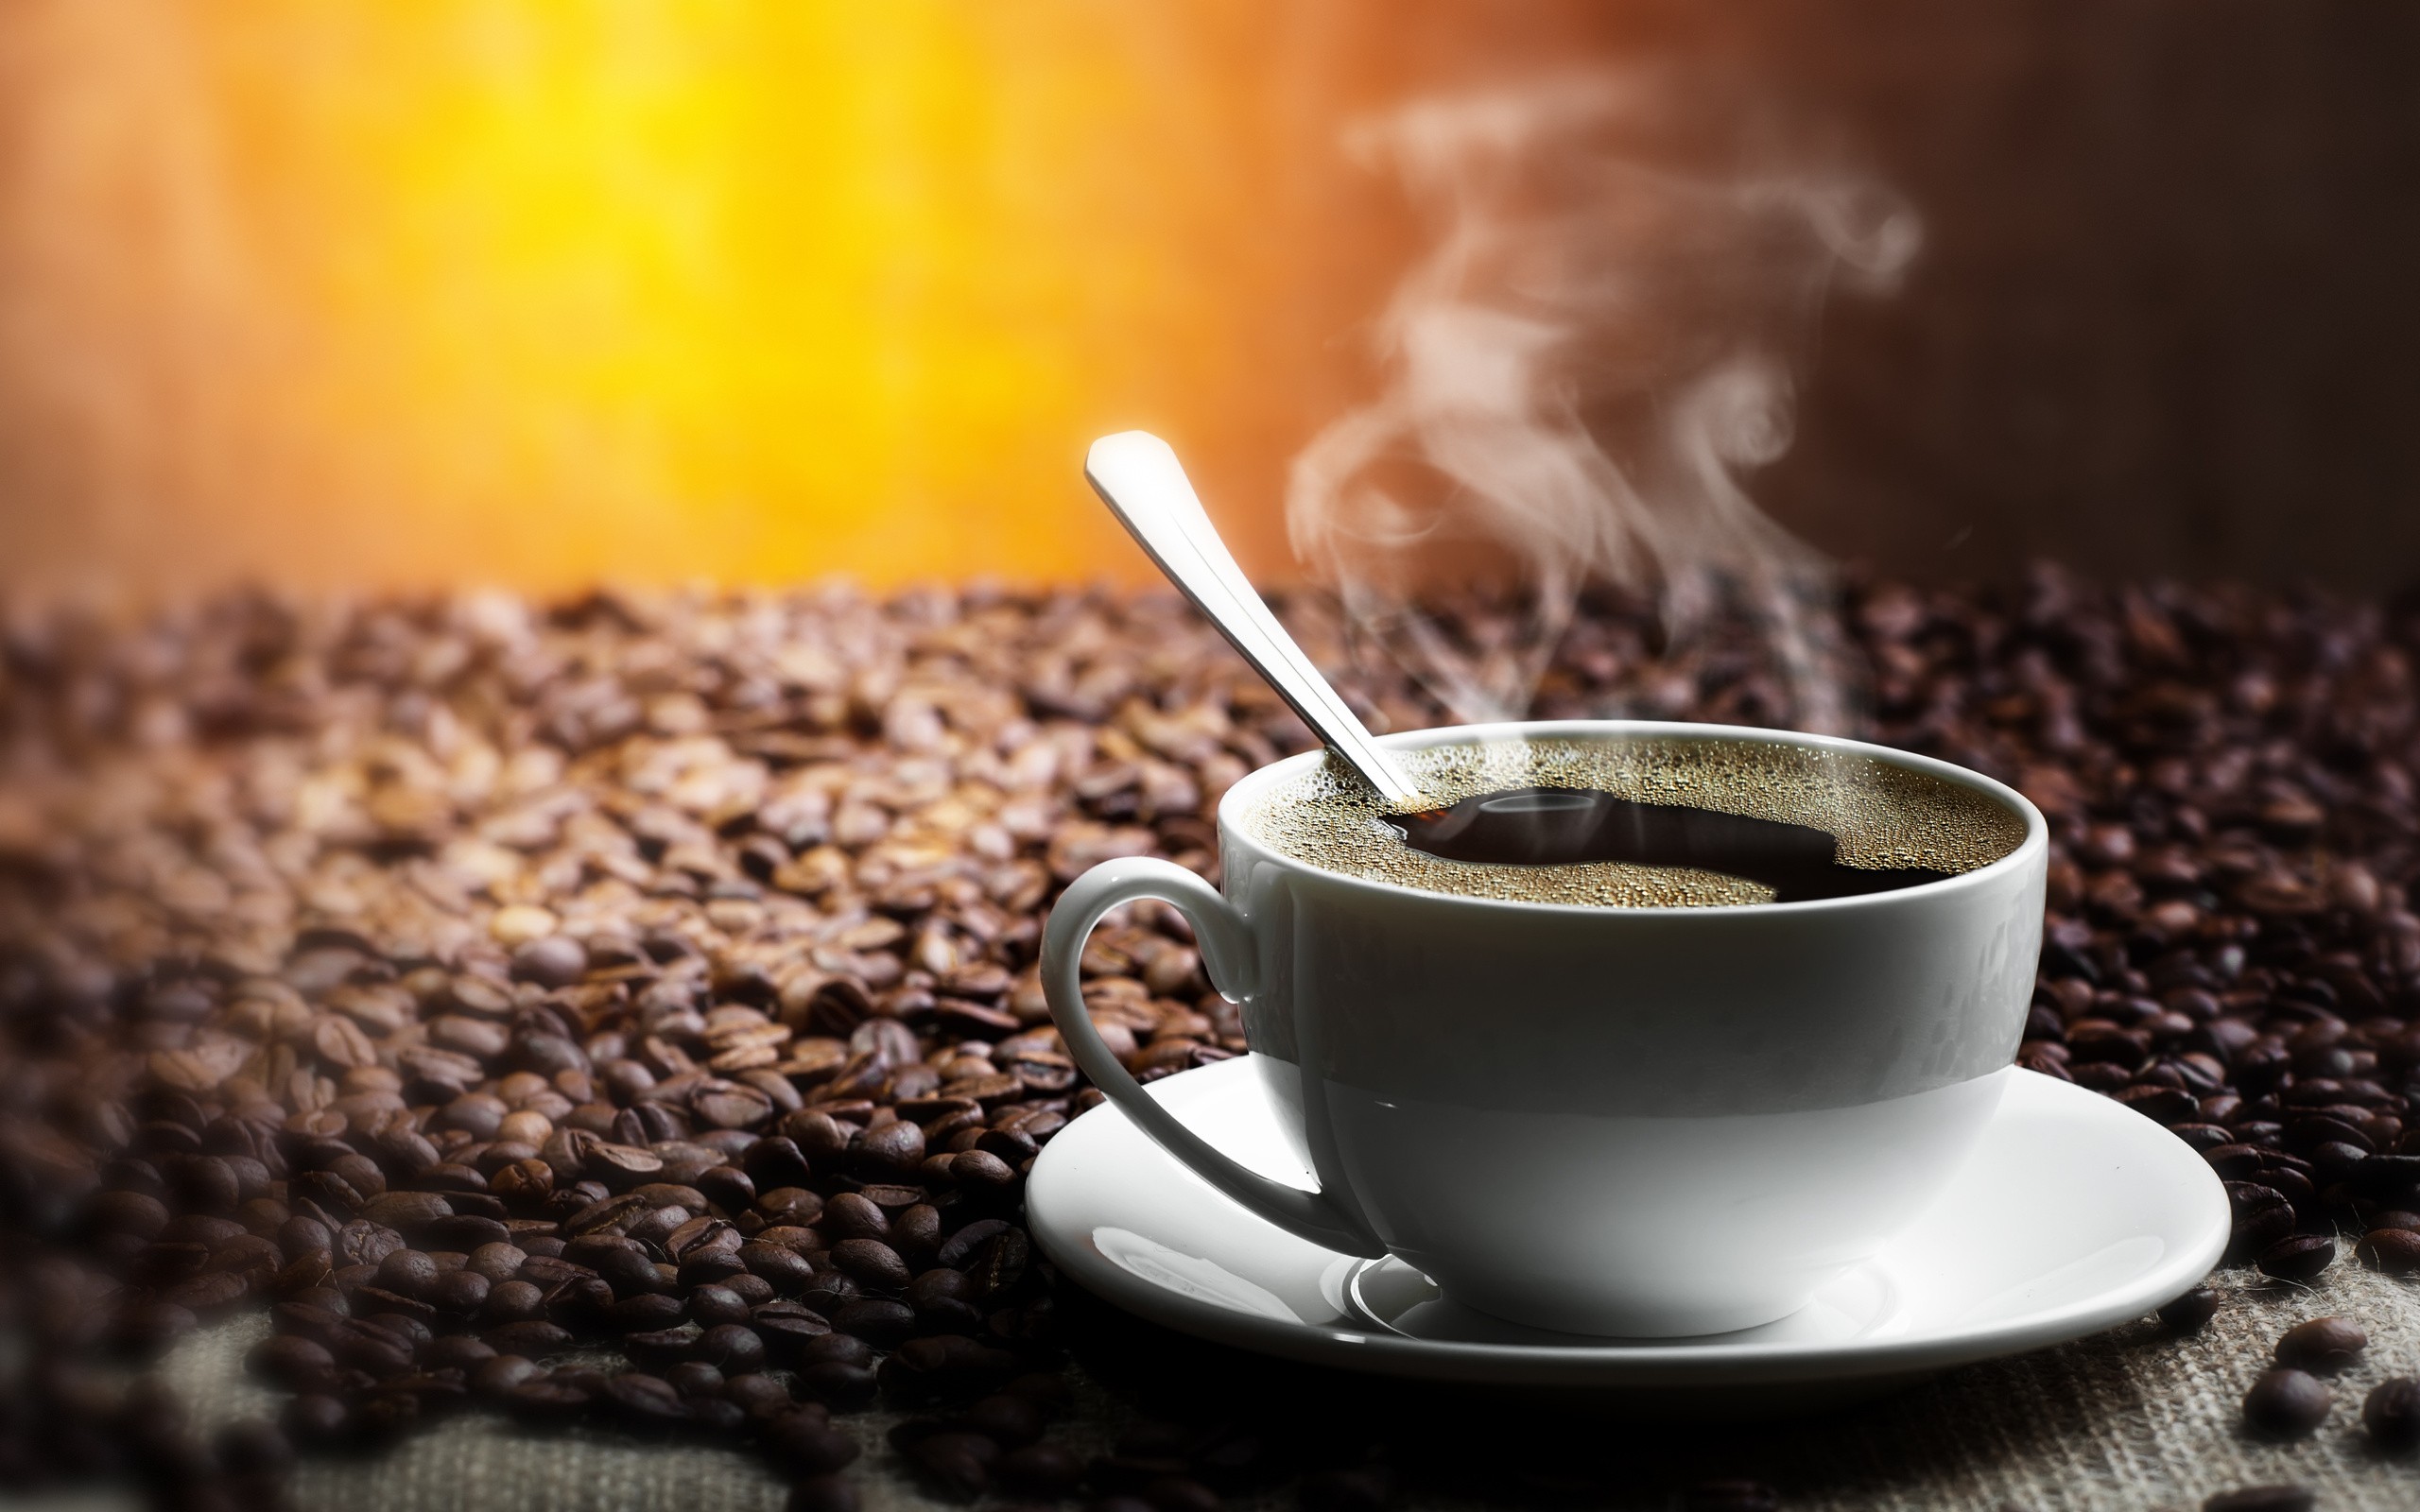 General 2560x1600 coffee beans cup coffee hot drink food closeup